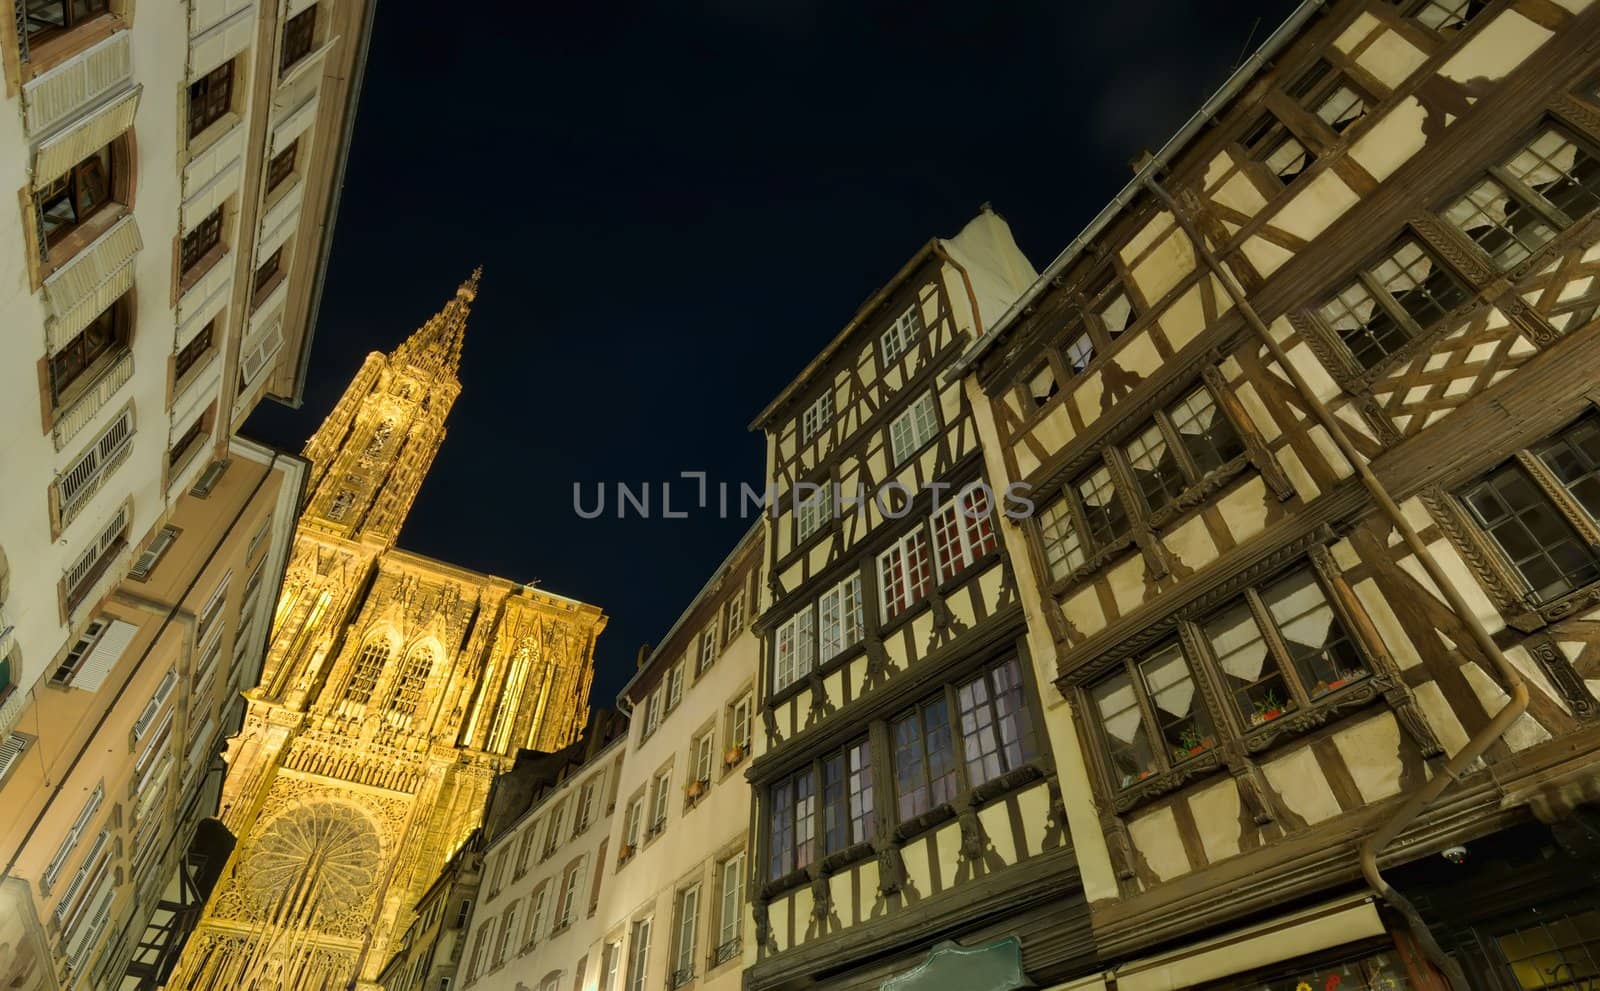 Strasbourg cathedral at night by johny007pan